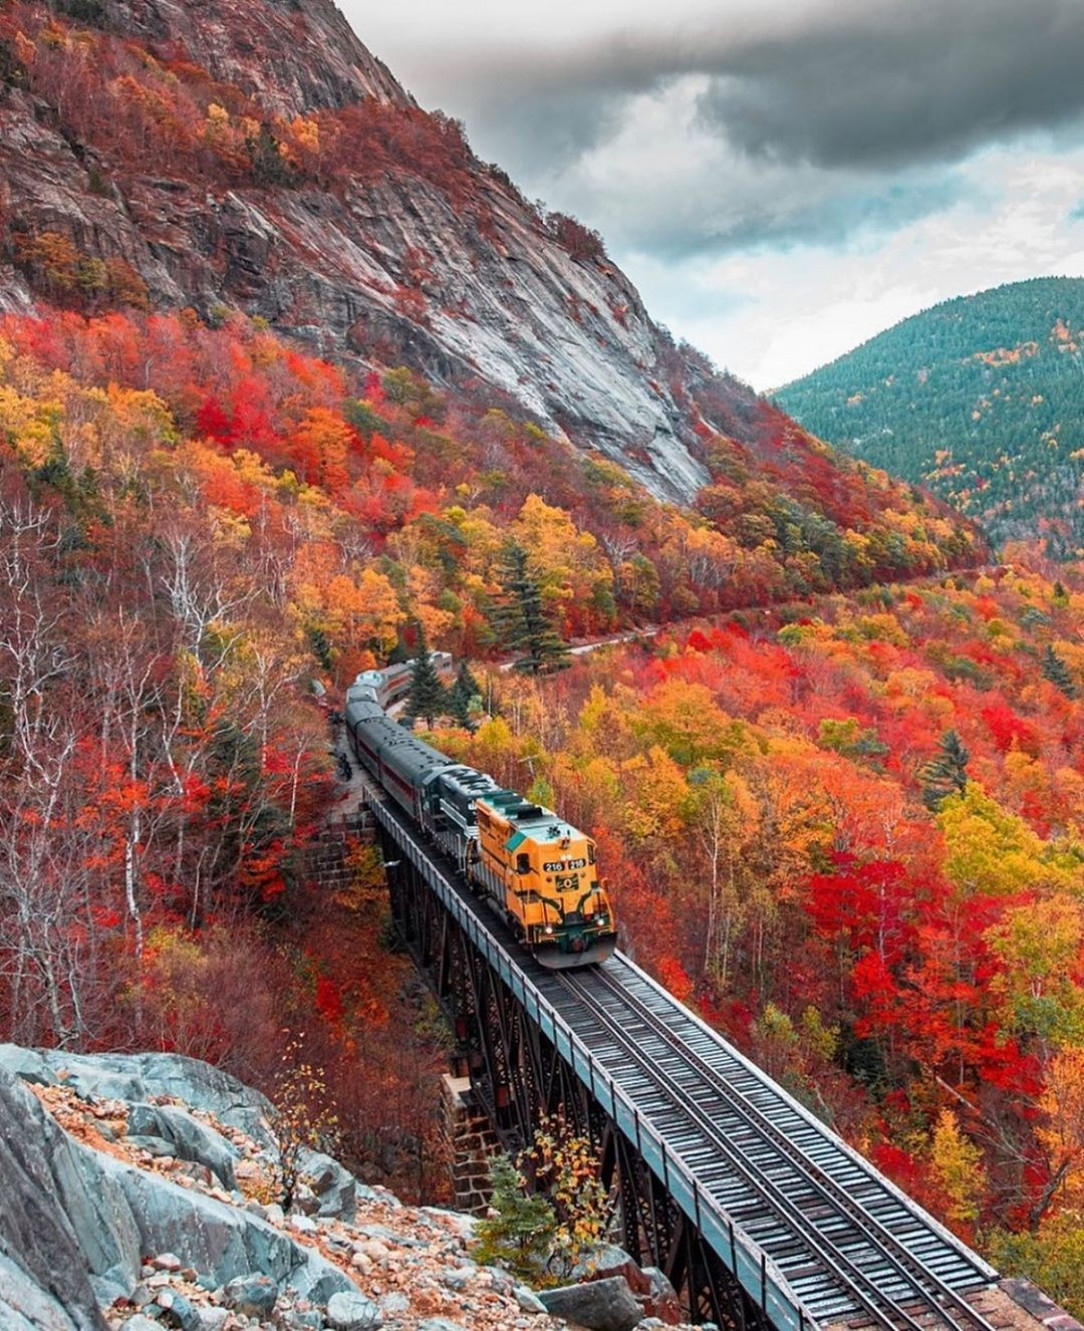 Conway Scenic Railroad train in the White Mountains region of New Hampshire